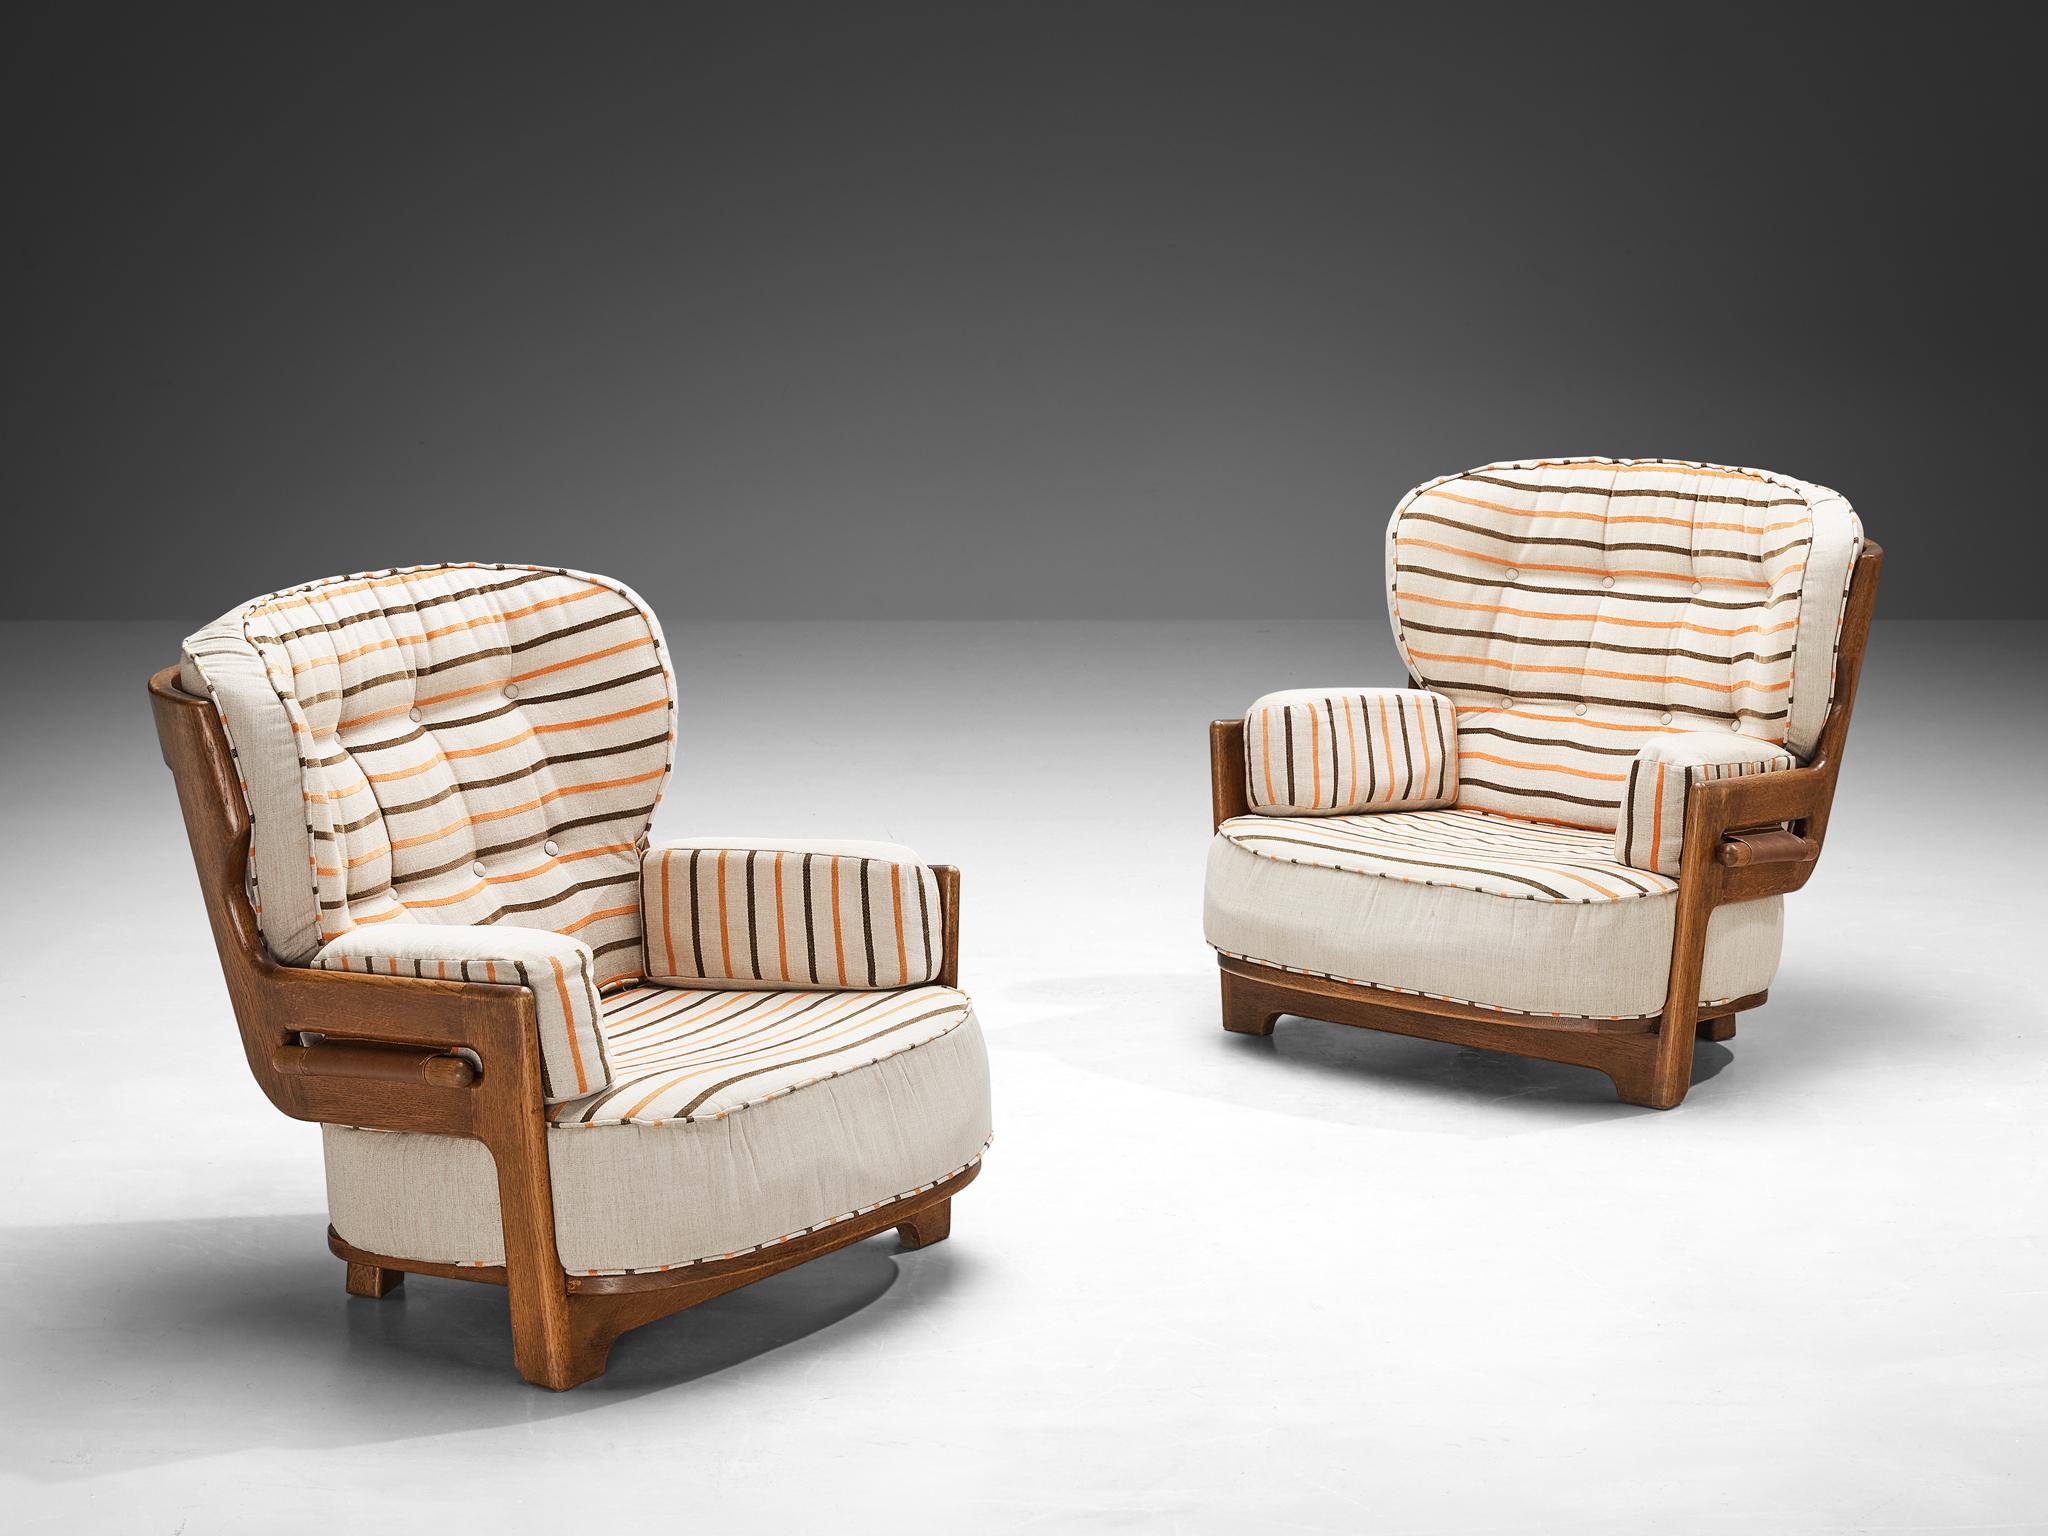 Guillerme et Chambron for Votre Maison, pair of lounge chairs, model 'Denis', fabric, oak, France, 1960s

This ‘Denis’ lounge chair is designed by the French designer duo Jacques Chambron and Robert Guillerme. The design features a stable